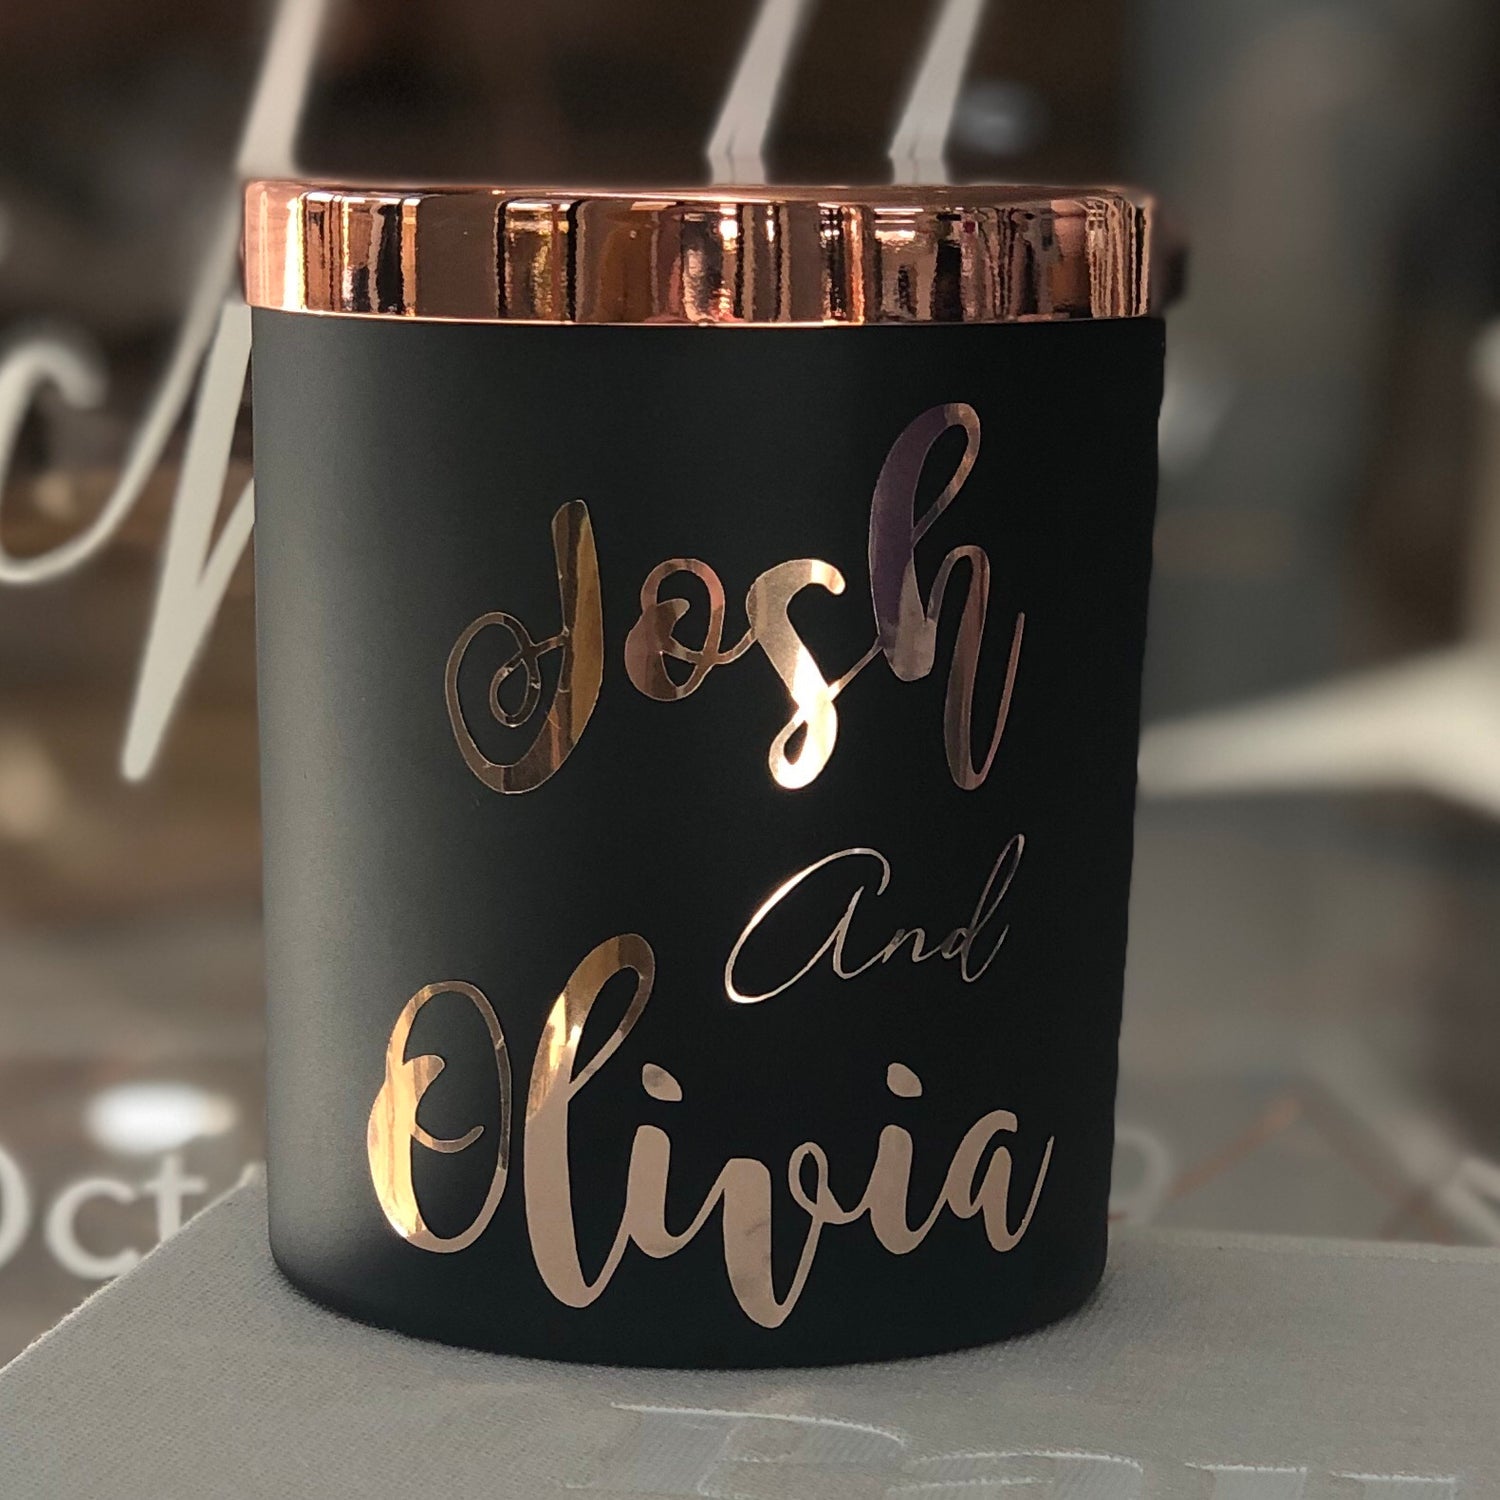 Our Matt Black & Rose Gold Electroplated Candle brings a touch of sophistication to your home. This exquisite candle is hand crafted with 100% pure Sox Wax and a wooden wick for a strong, long-lasting burn. Perfect for a luxurious gift for someone special, this candle is sure to impress.